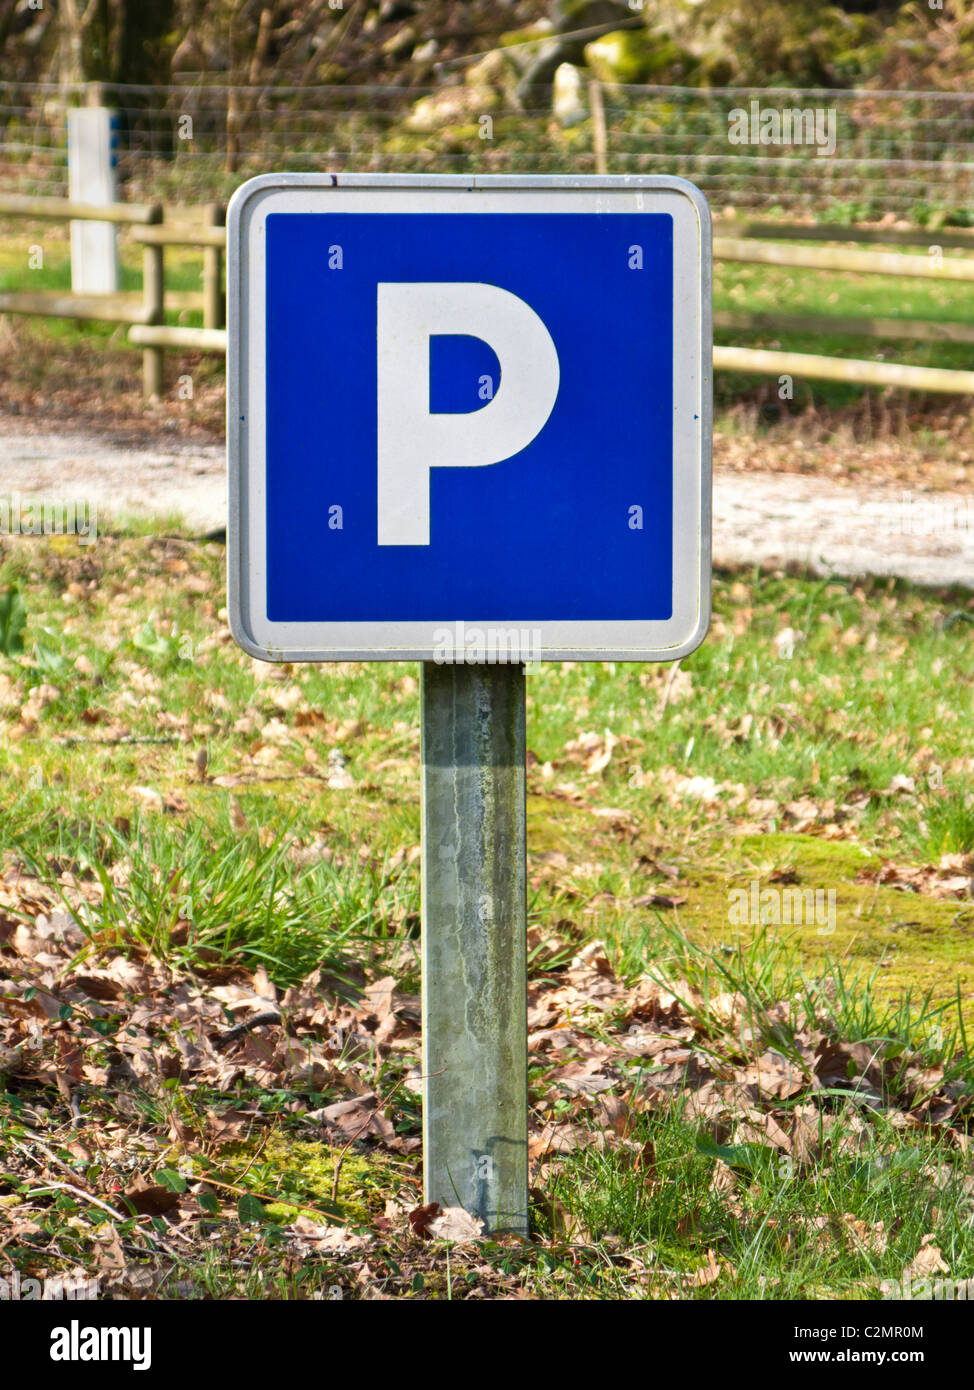 Parking sign for a car park Stock Photo